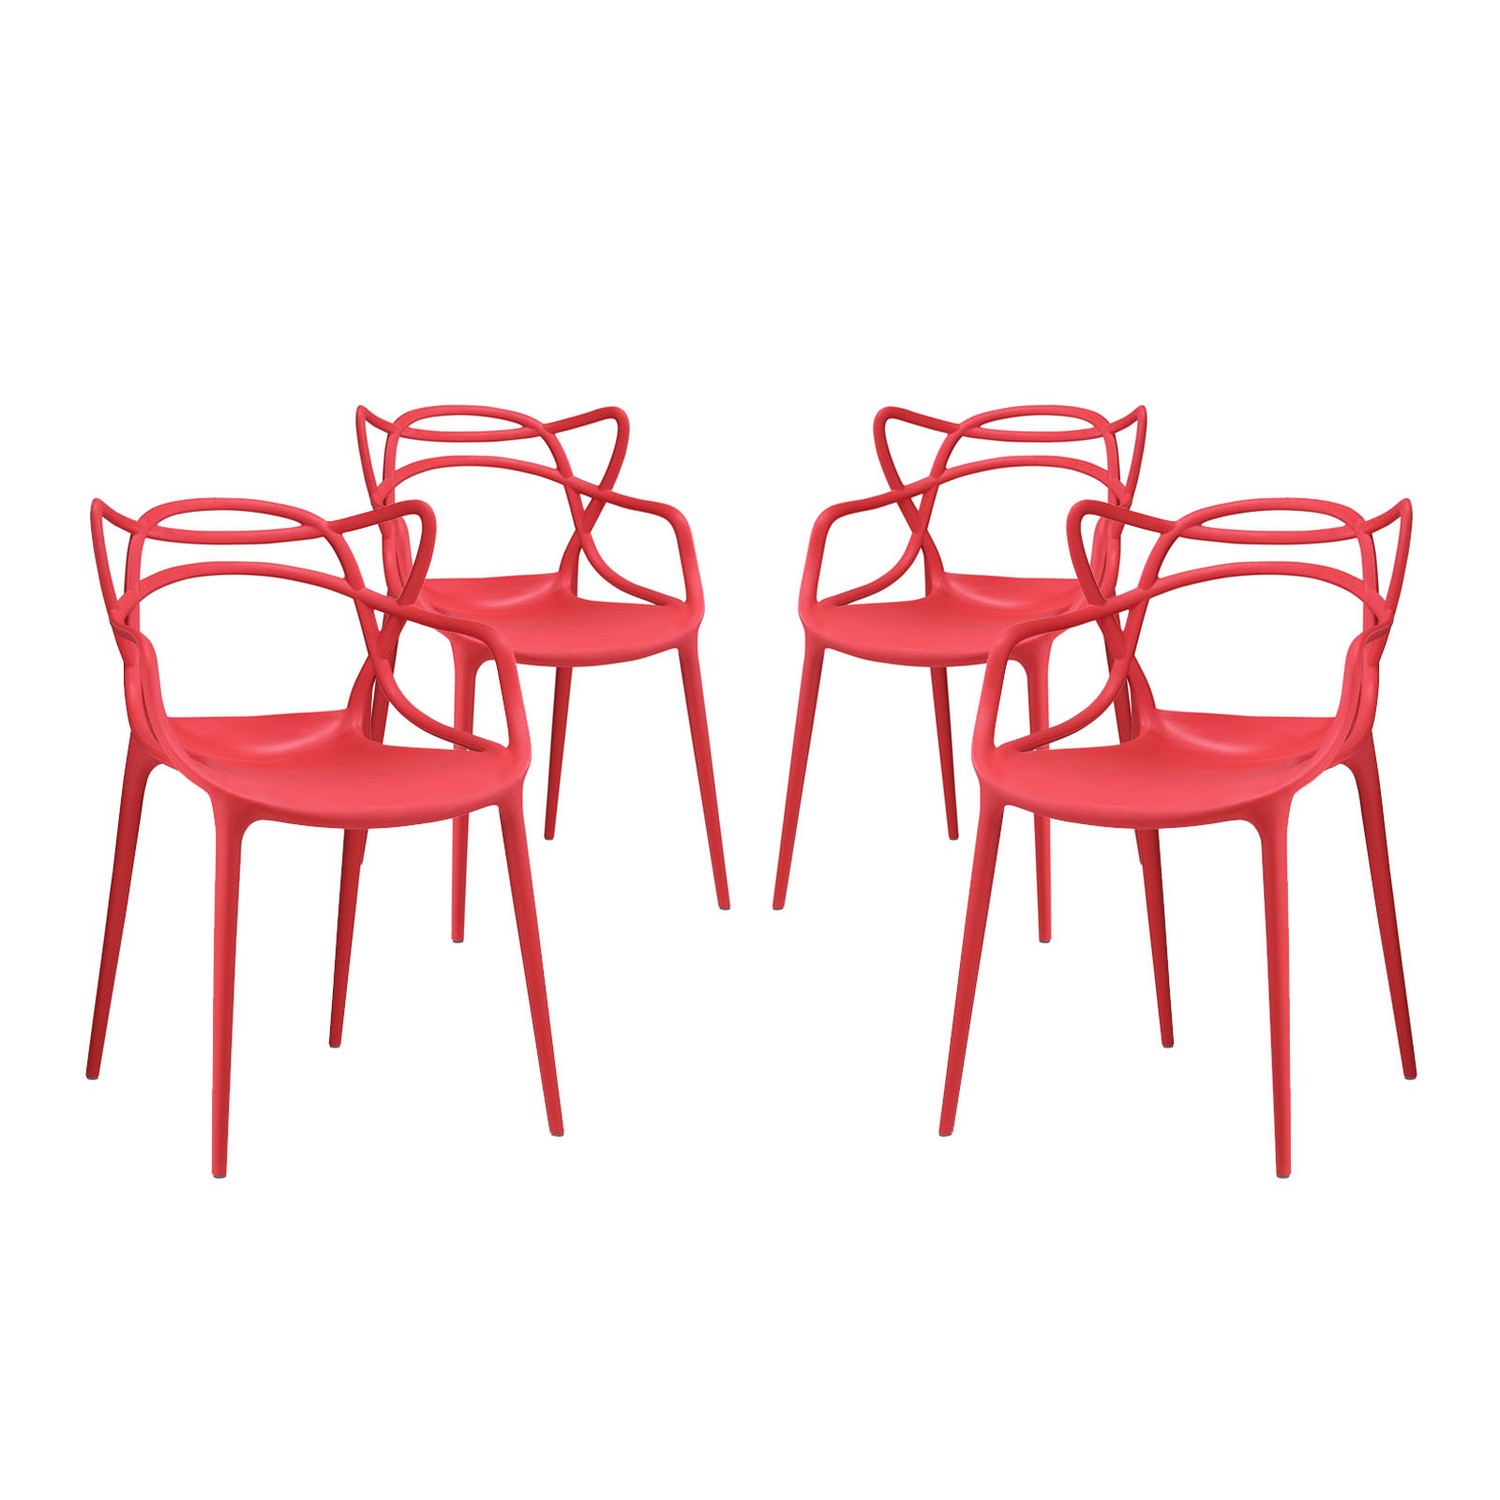 Modway Entangled Dining Chair - Set of 4 - Red